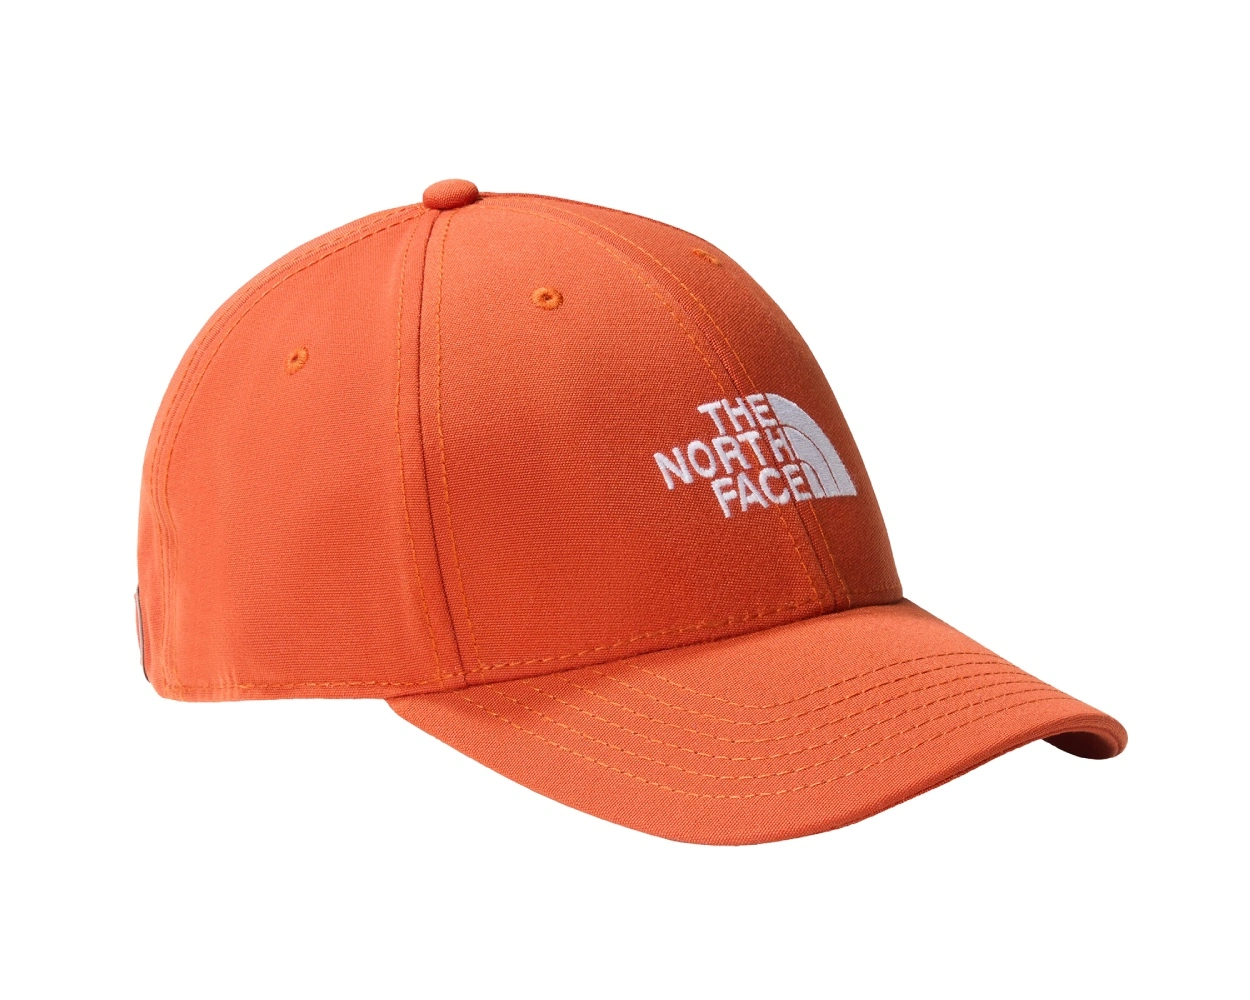 The North Face Recycled 66 pet skate